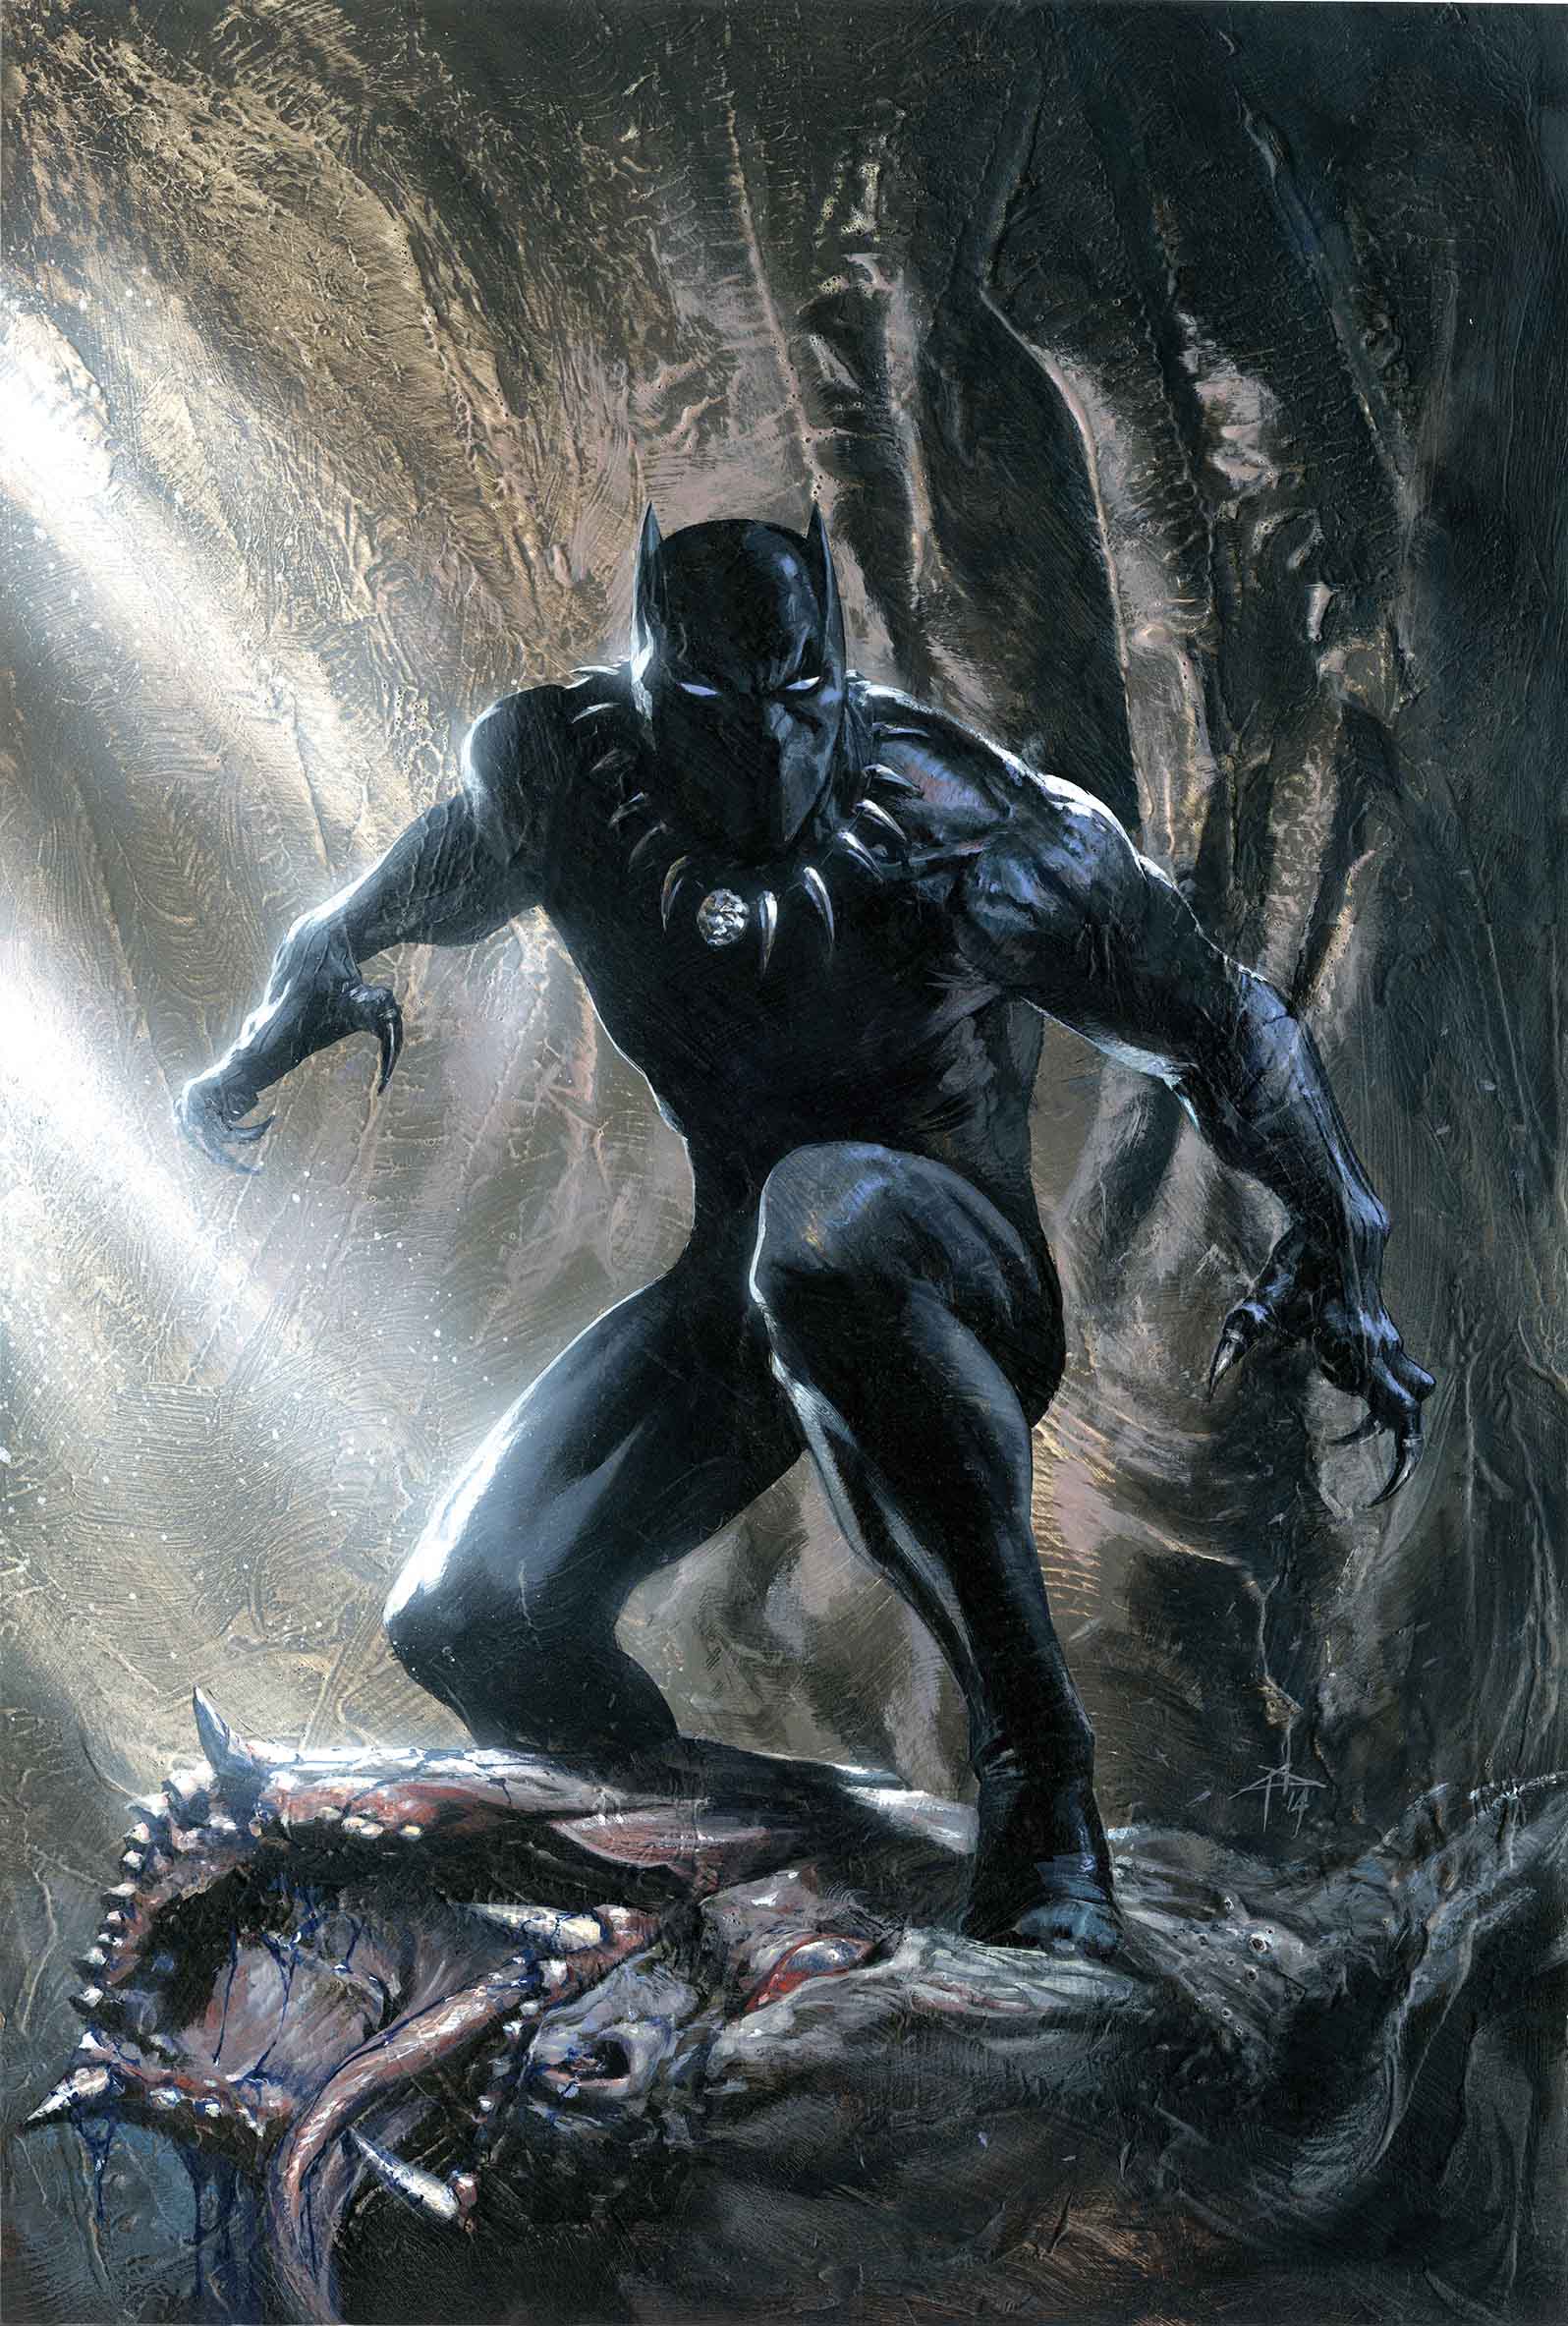 t challa black panther wakanda forever 4k iPhone Wallpapers Free Download